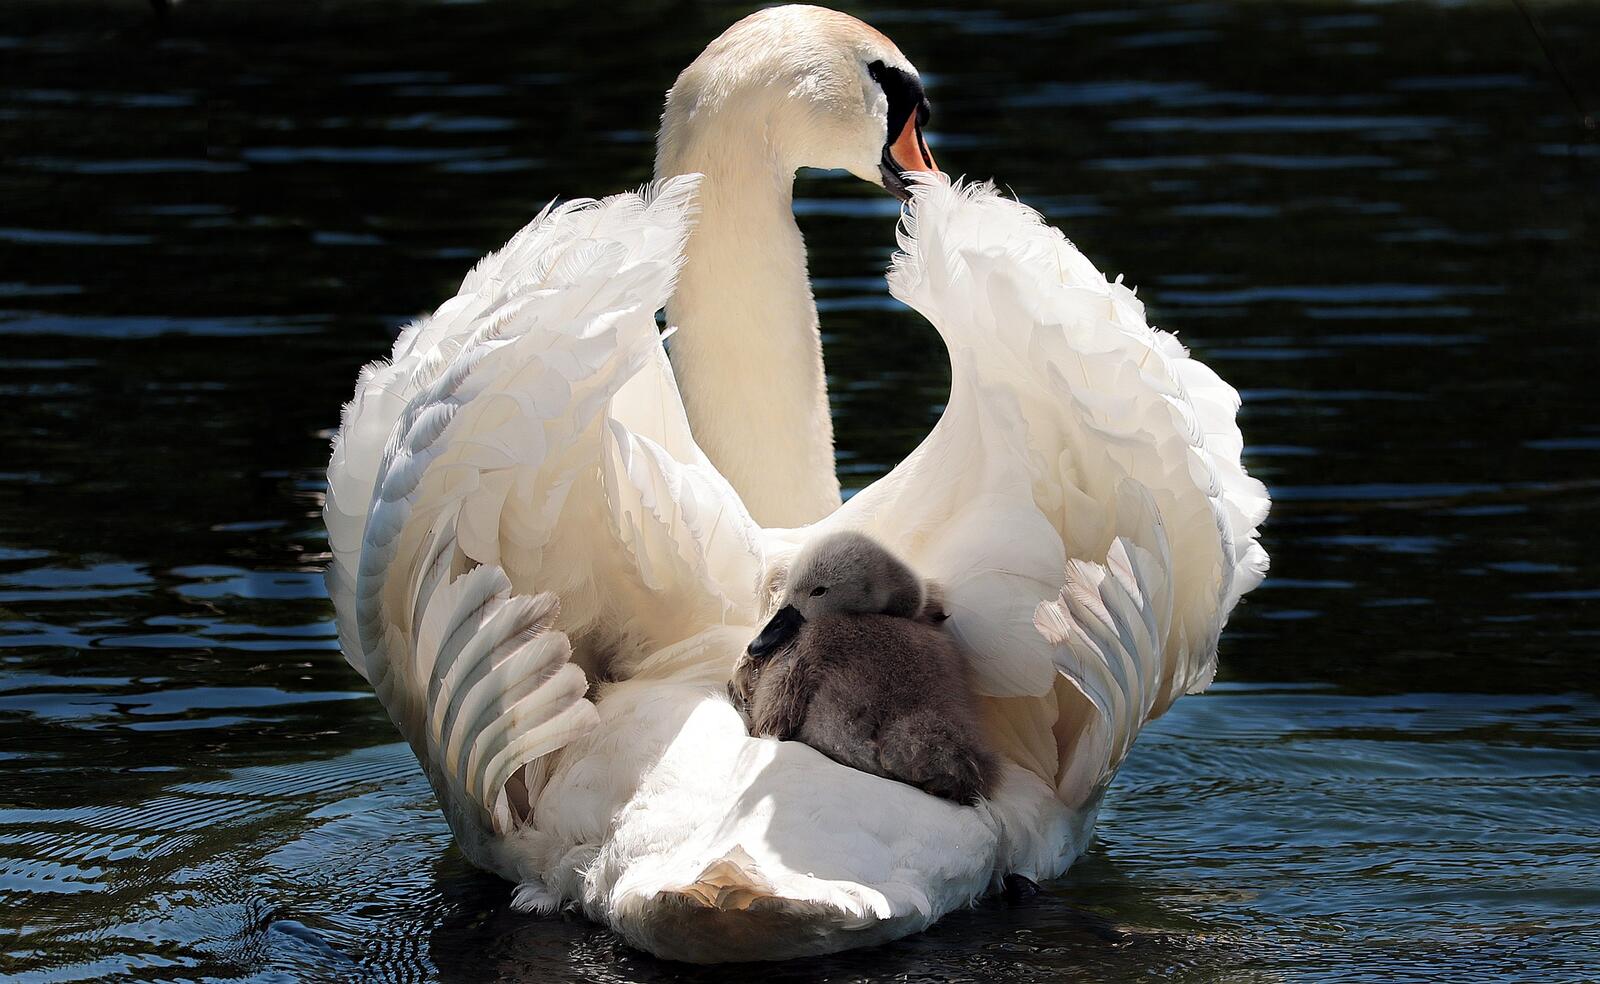 Free photo A swan with a baby on its back